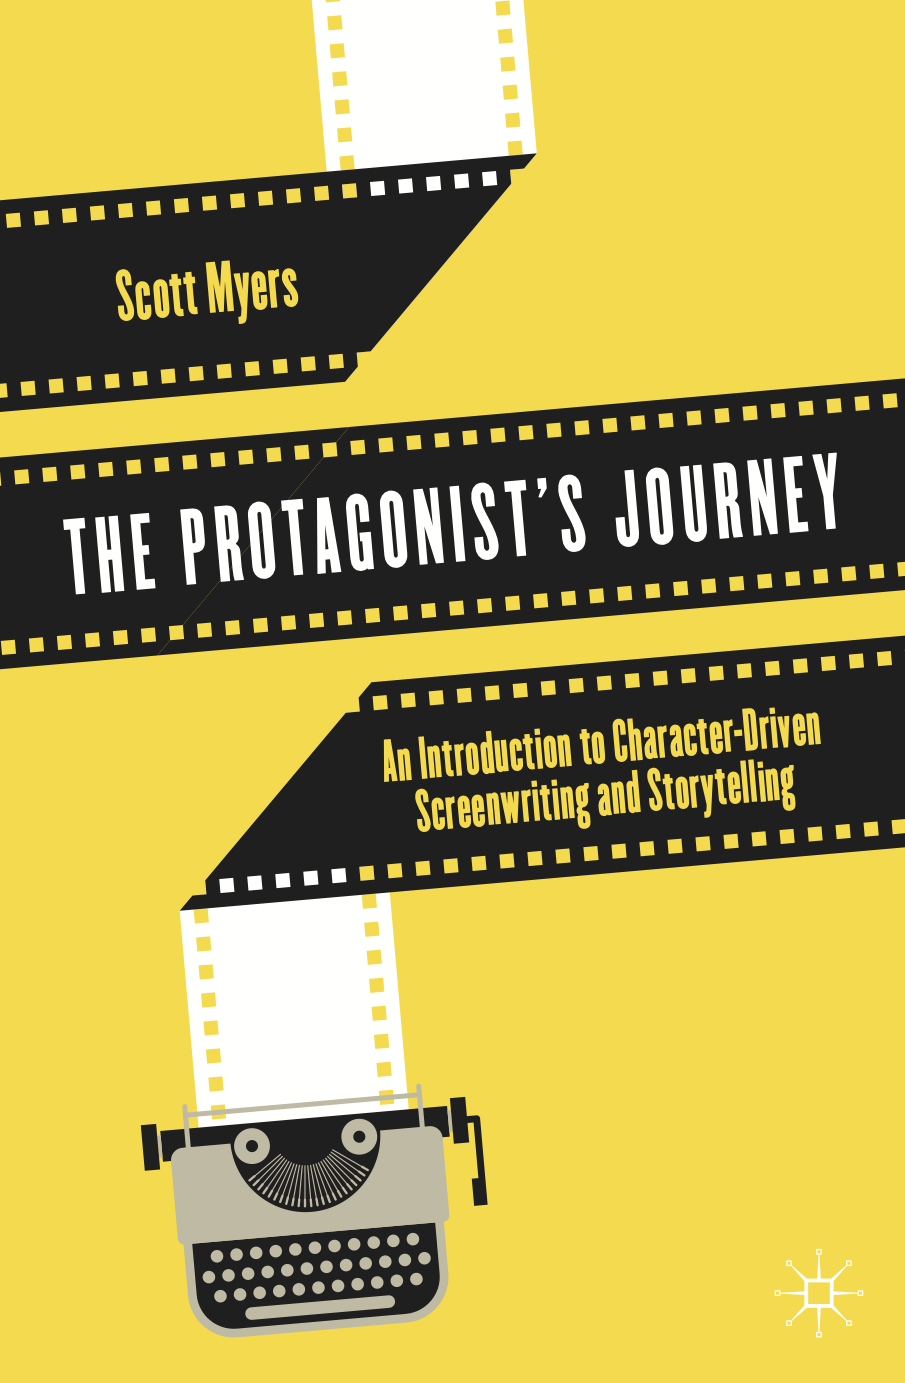 Exploring the protagonist’s journey and their 